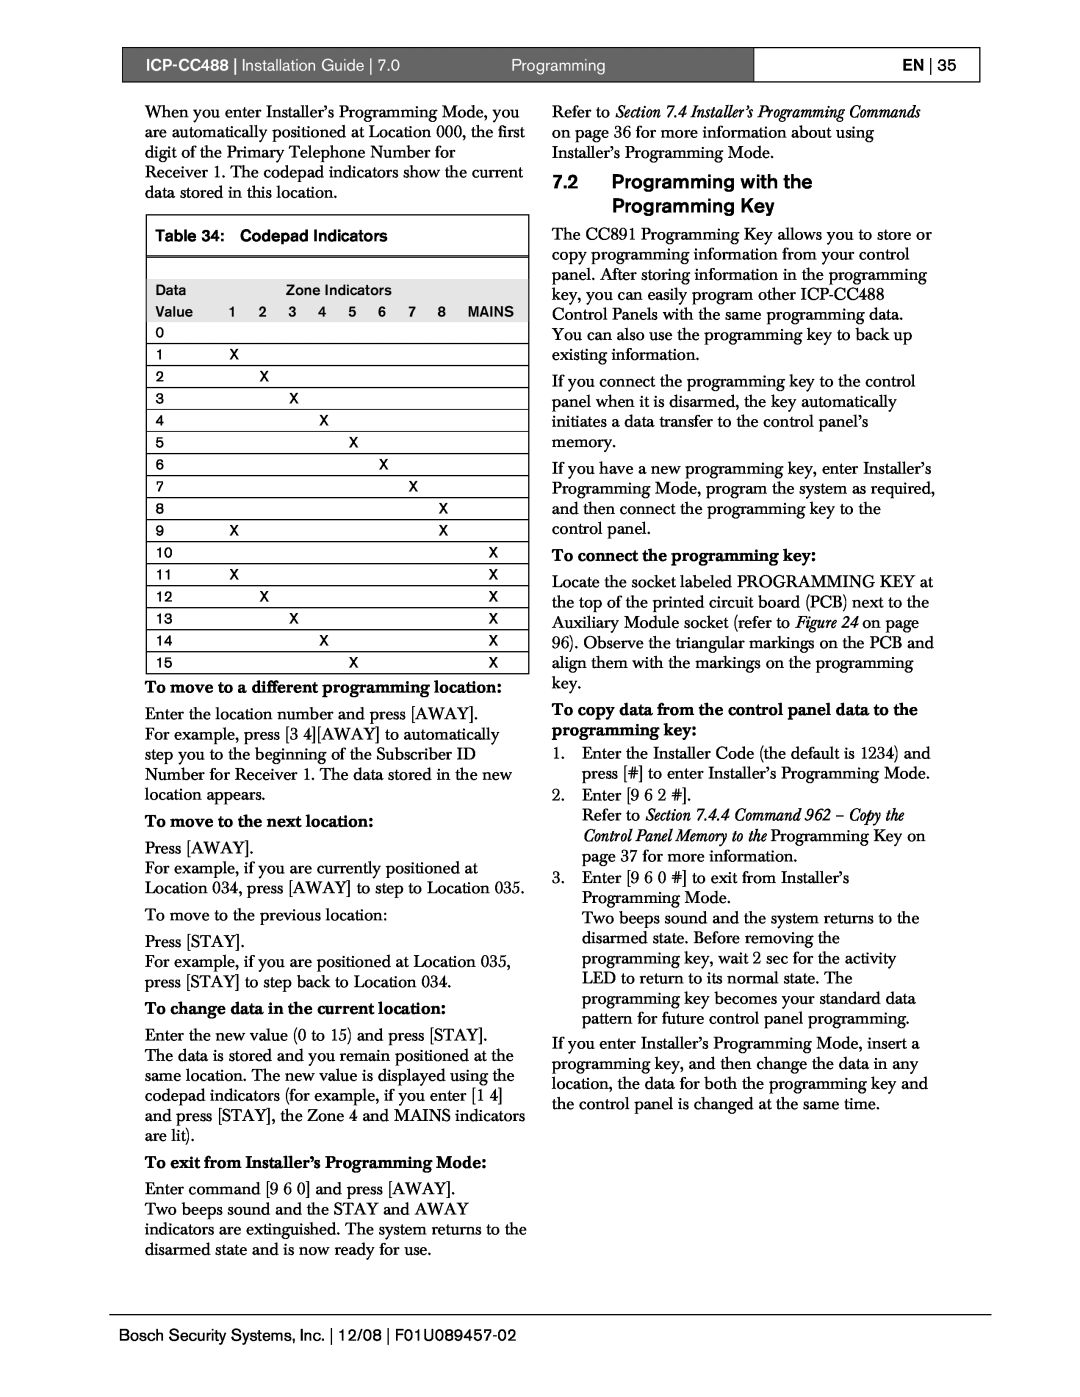 Bosch Appliances manual 7.2Programming with the Programming Key, ICP-CC488| Installation Guide, En, Codepad Indicators 